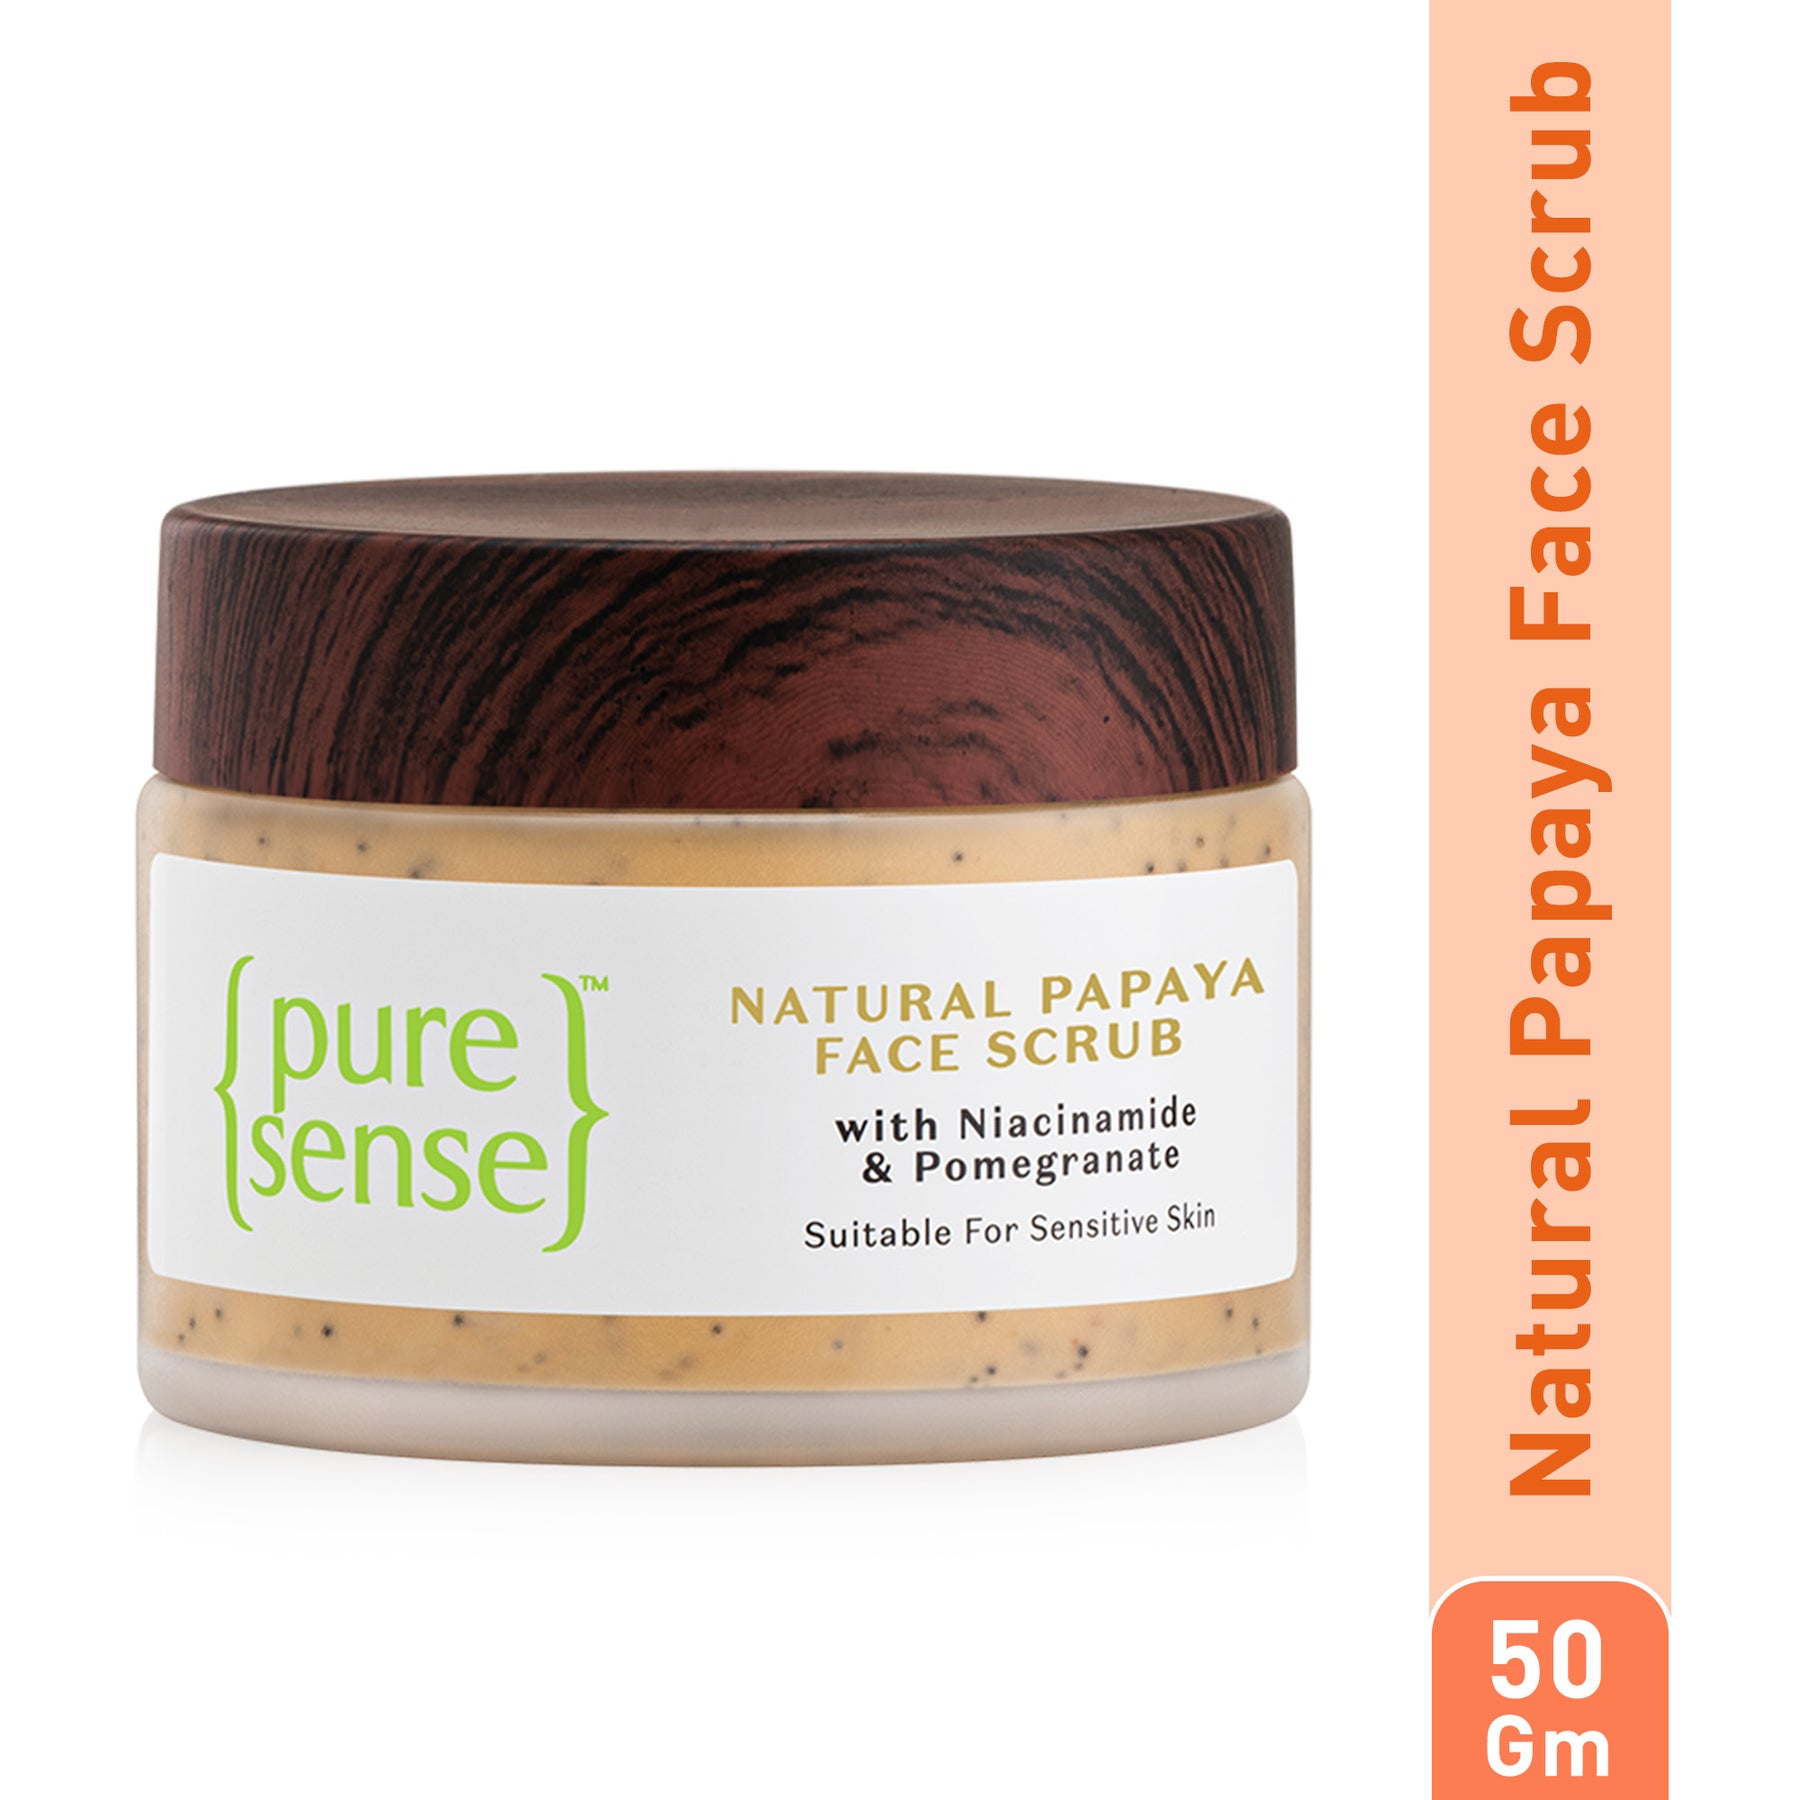 Natural Papaya Face Scrub | Paraben & Sulphate Free | From the makers of Parachute Advansed | 50g - PureSense